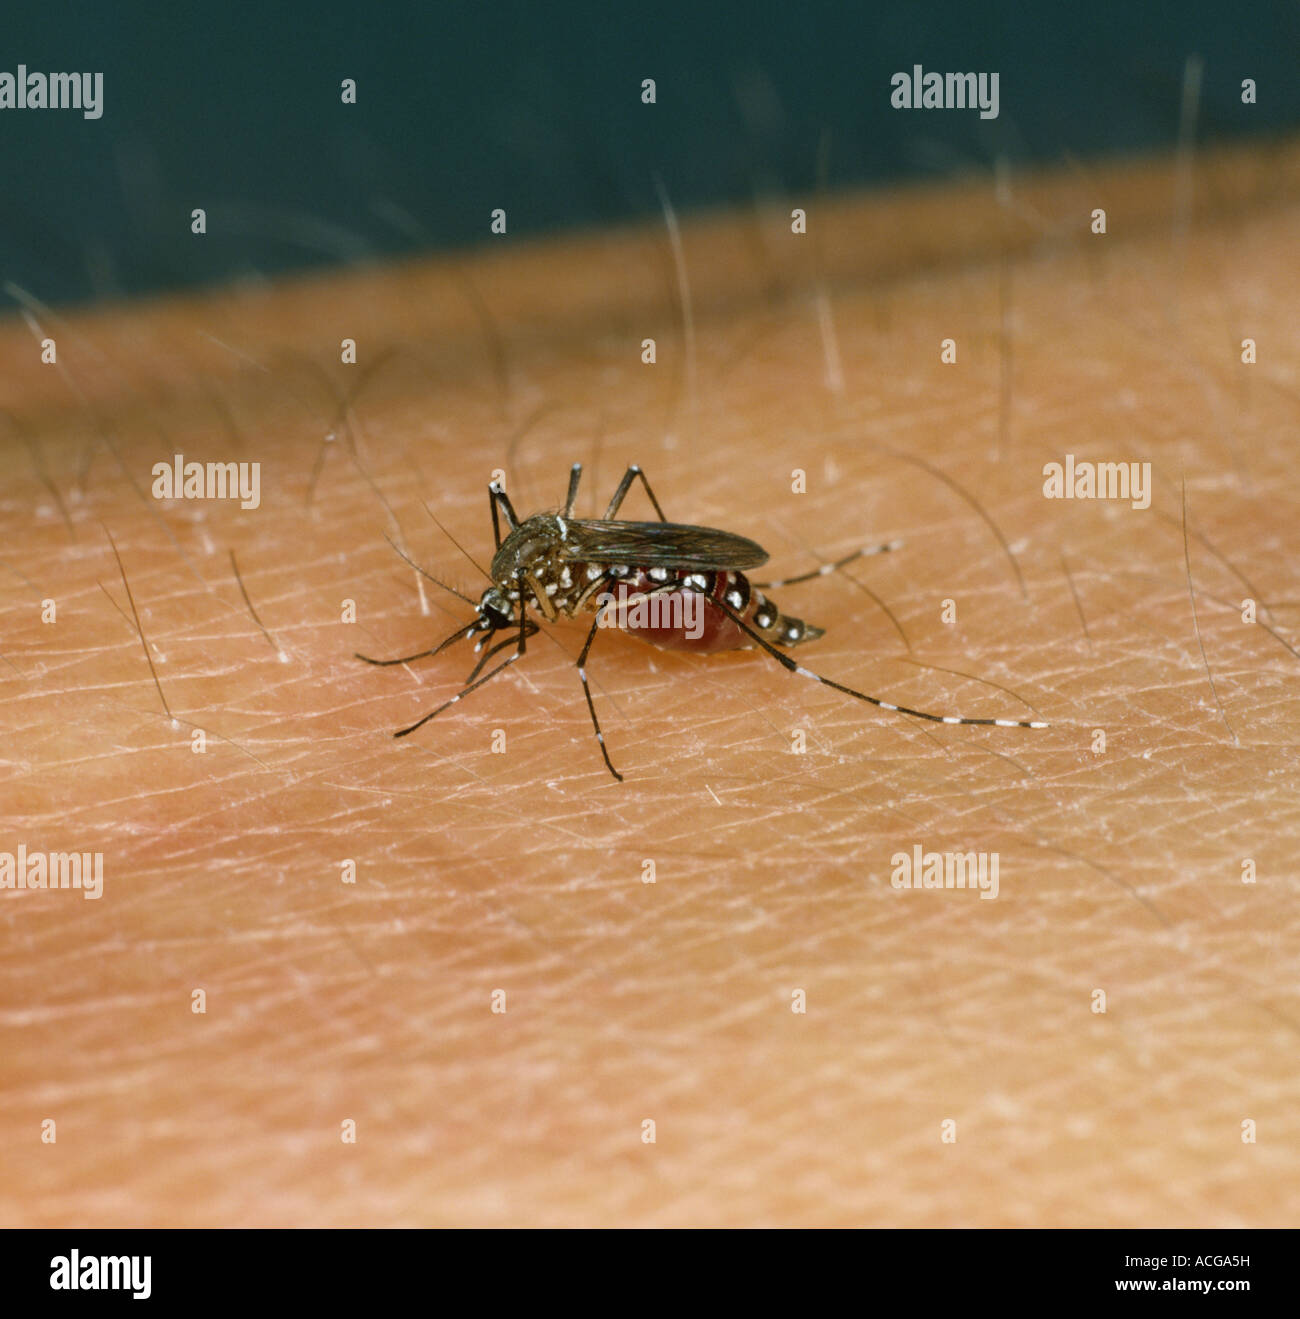 Yellow fever mosquito vector Aedes aegypti feeding on a human arm Stock Photo